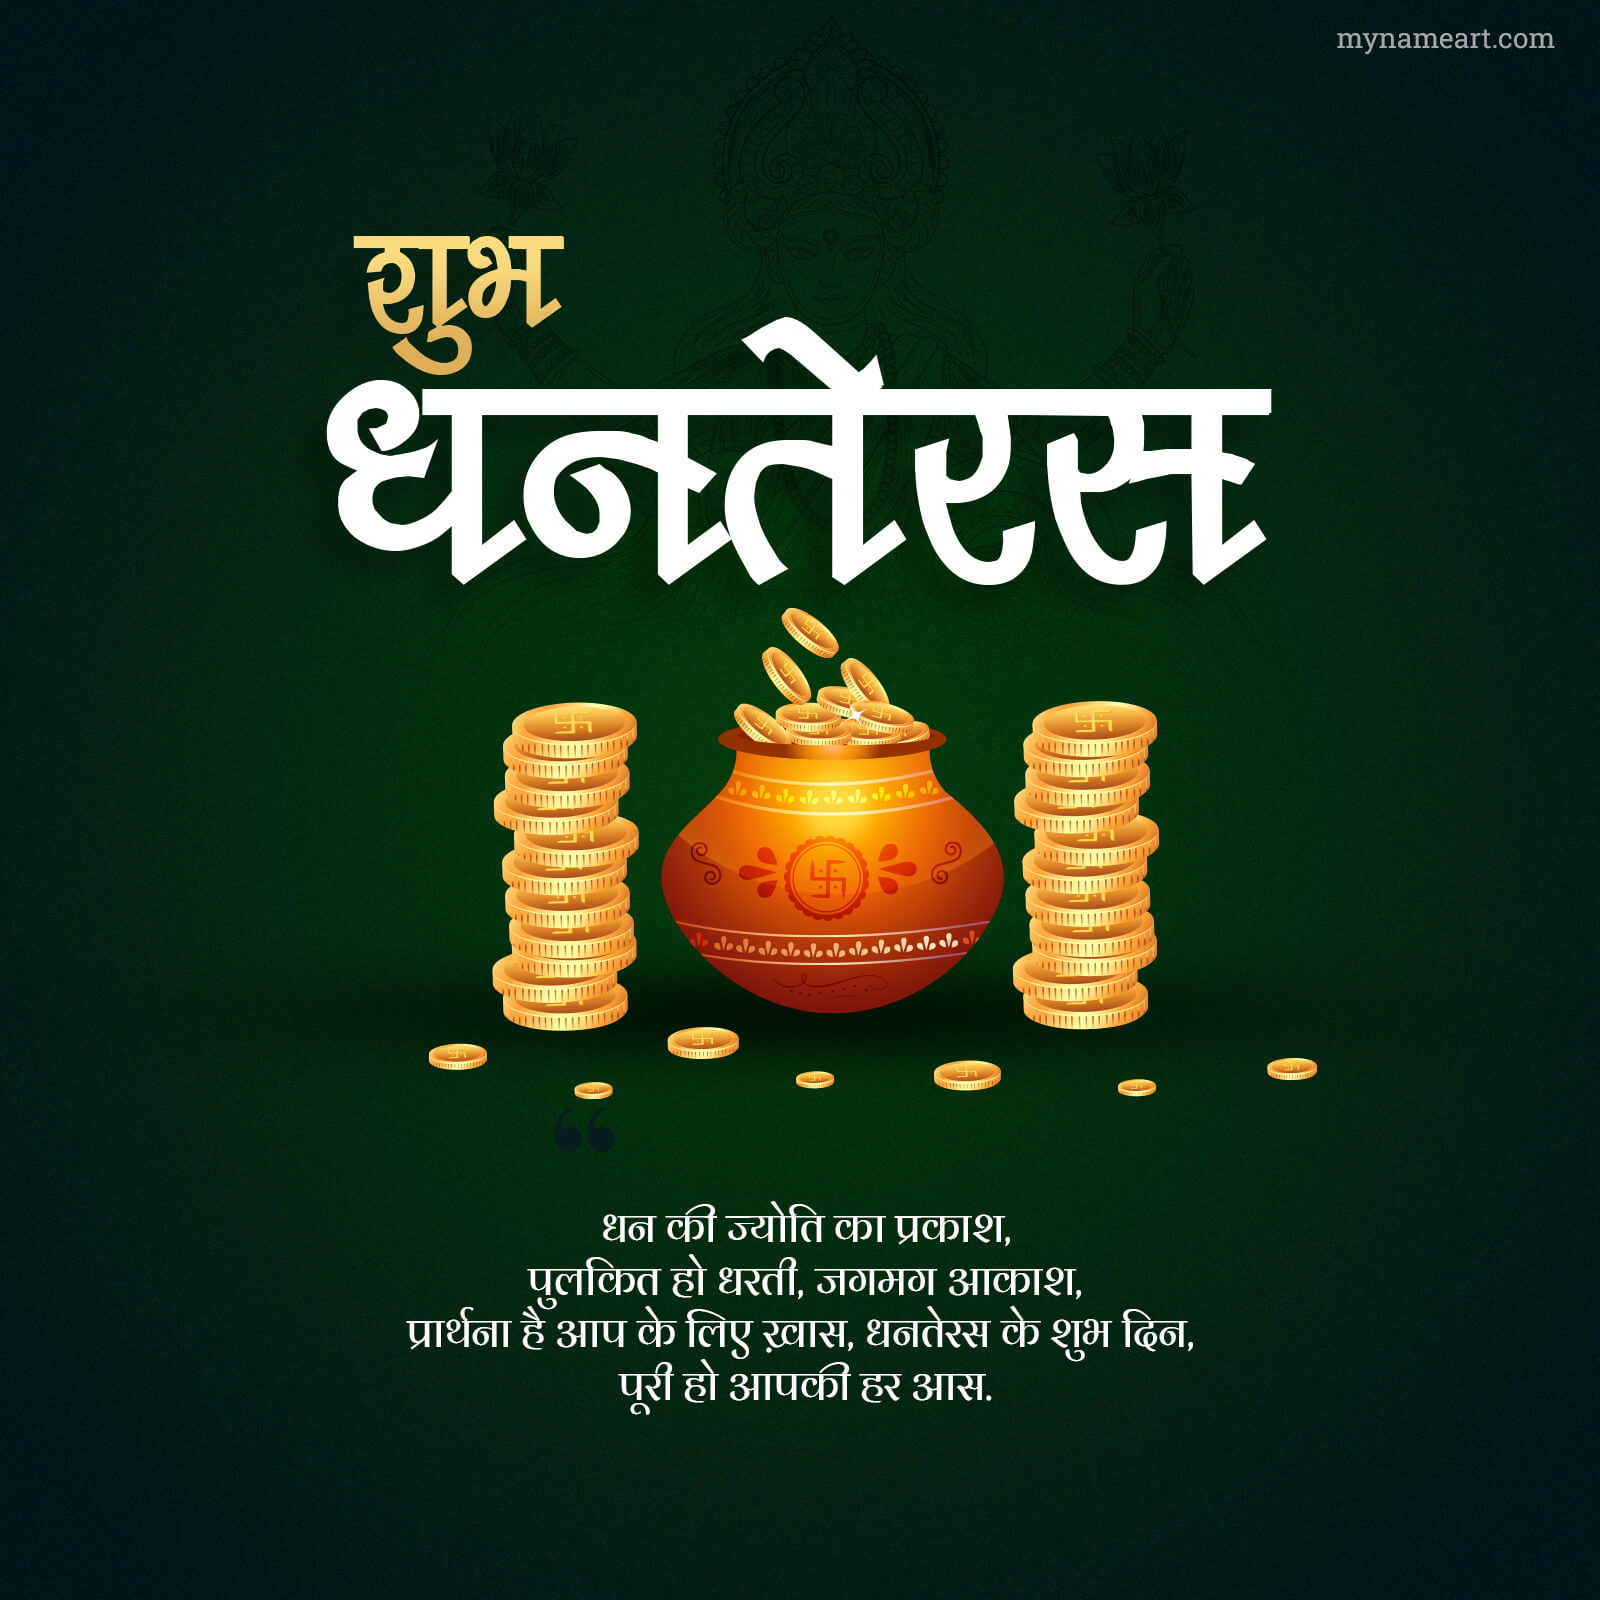 Happy Dhanteras Wishes Quotes Images Messages Greetings Status 7420